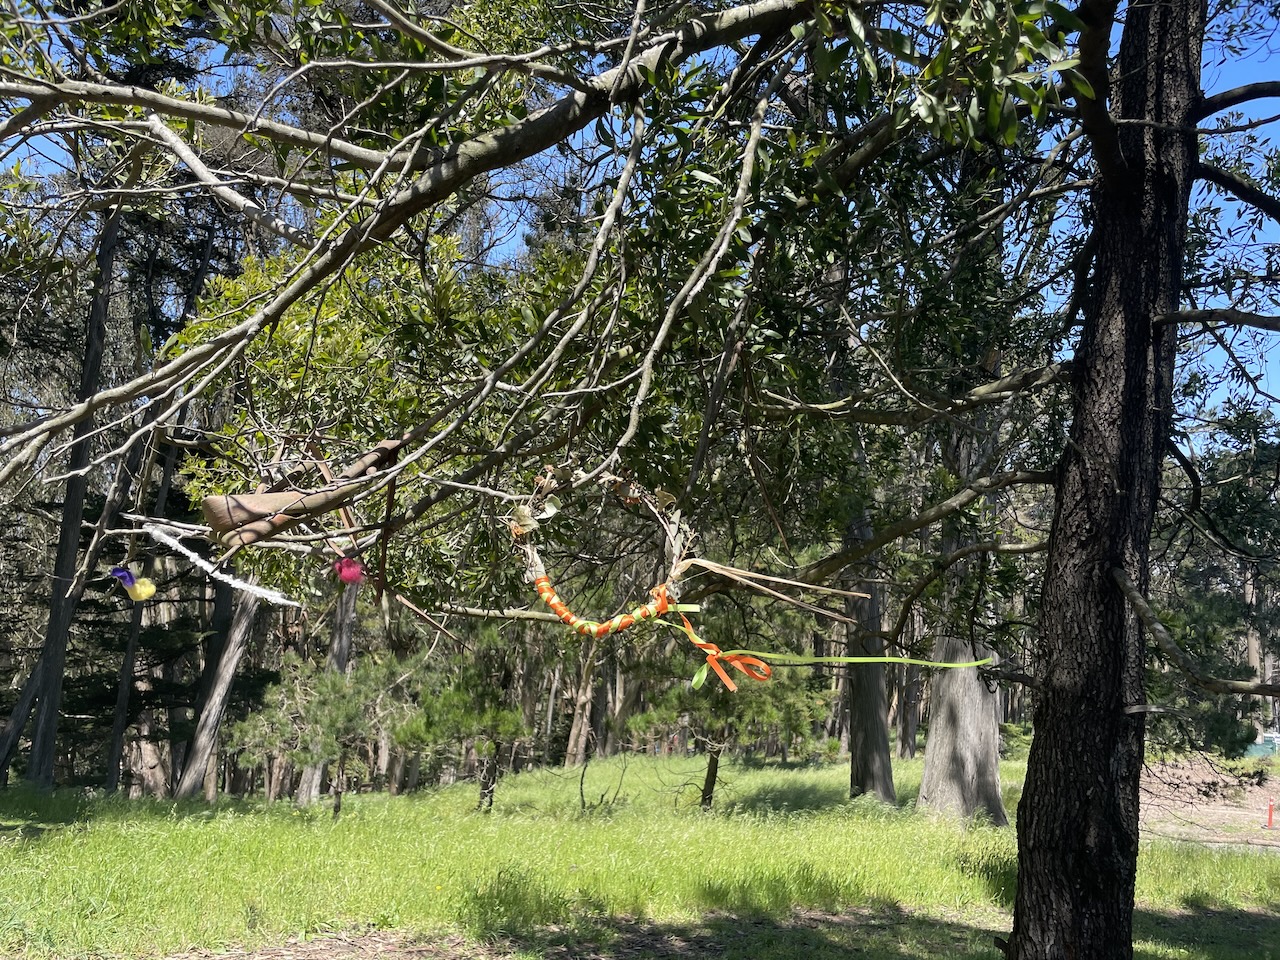 A wreath hangs on tree branch, its ribbons weaving in the wind